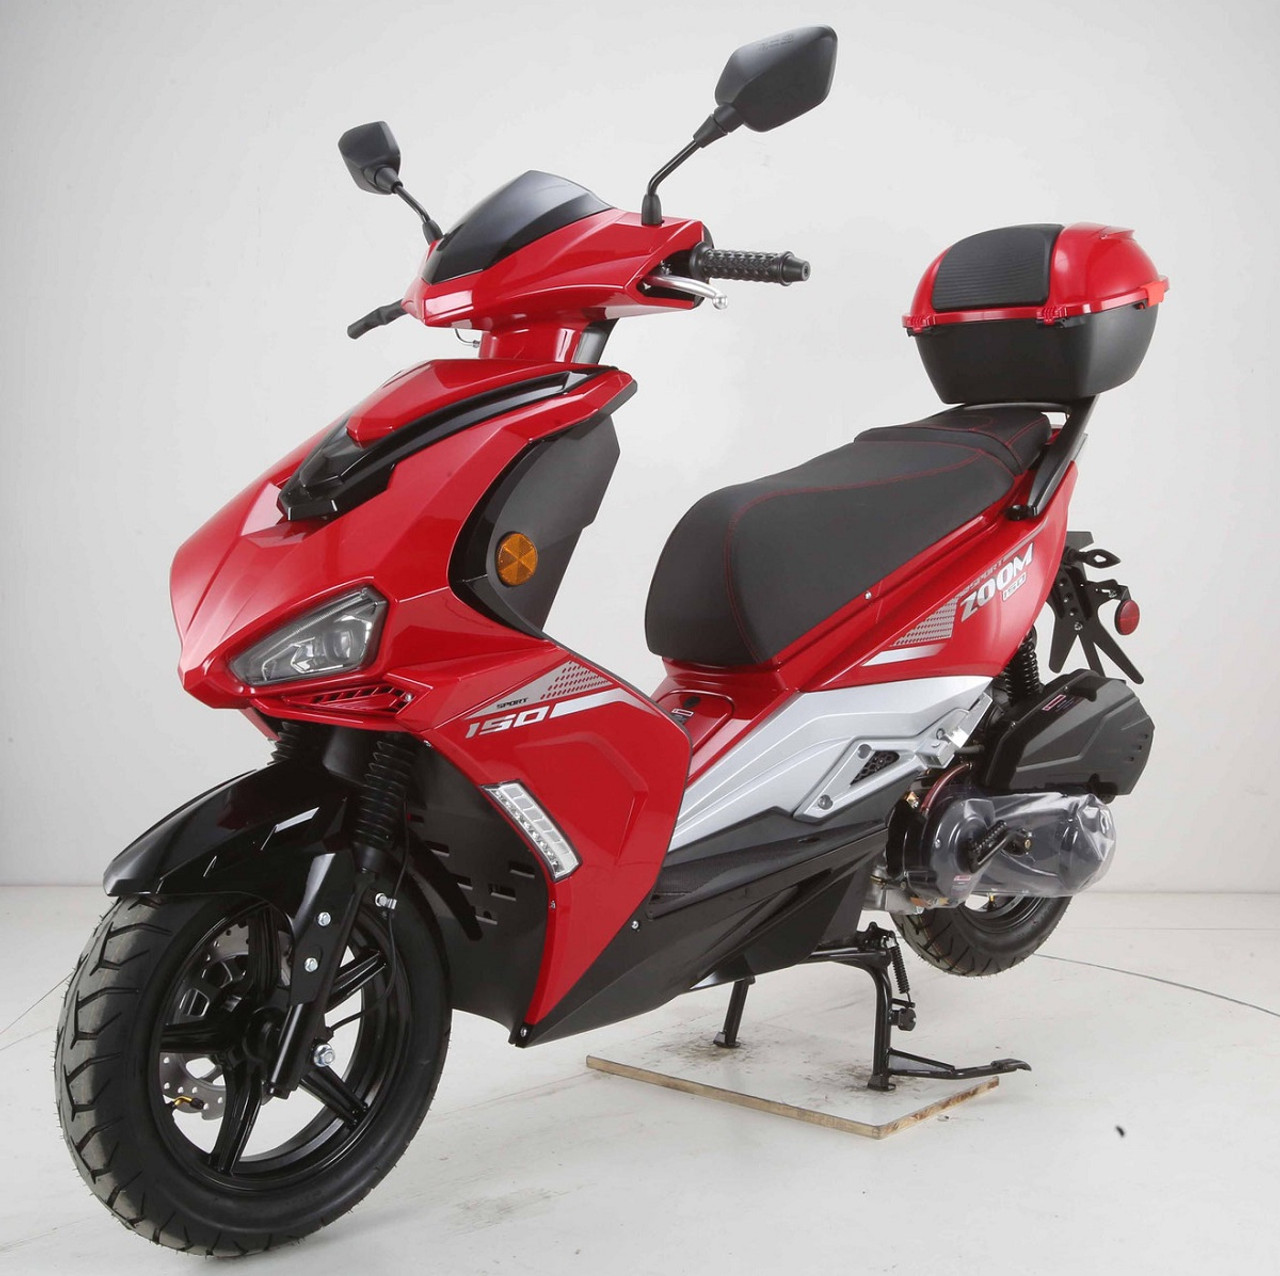 Vitacci Zoom 150Cc Scooter, GY6 4-Stroke, Air Cooled